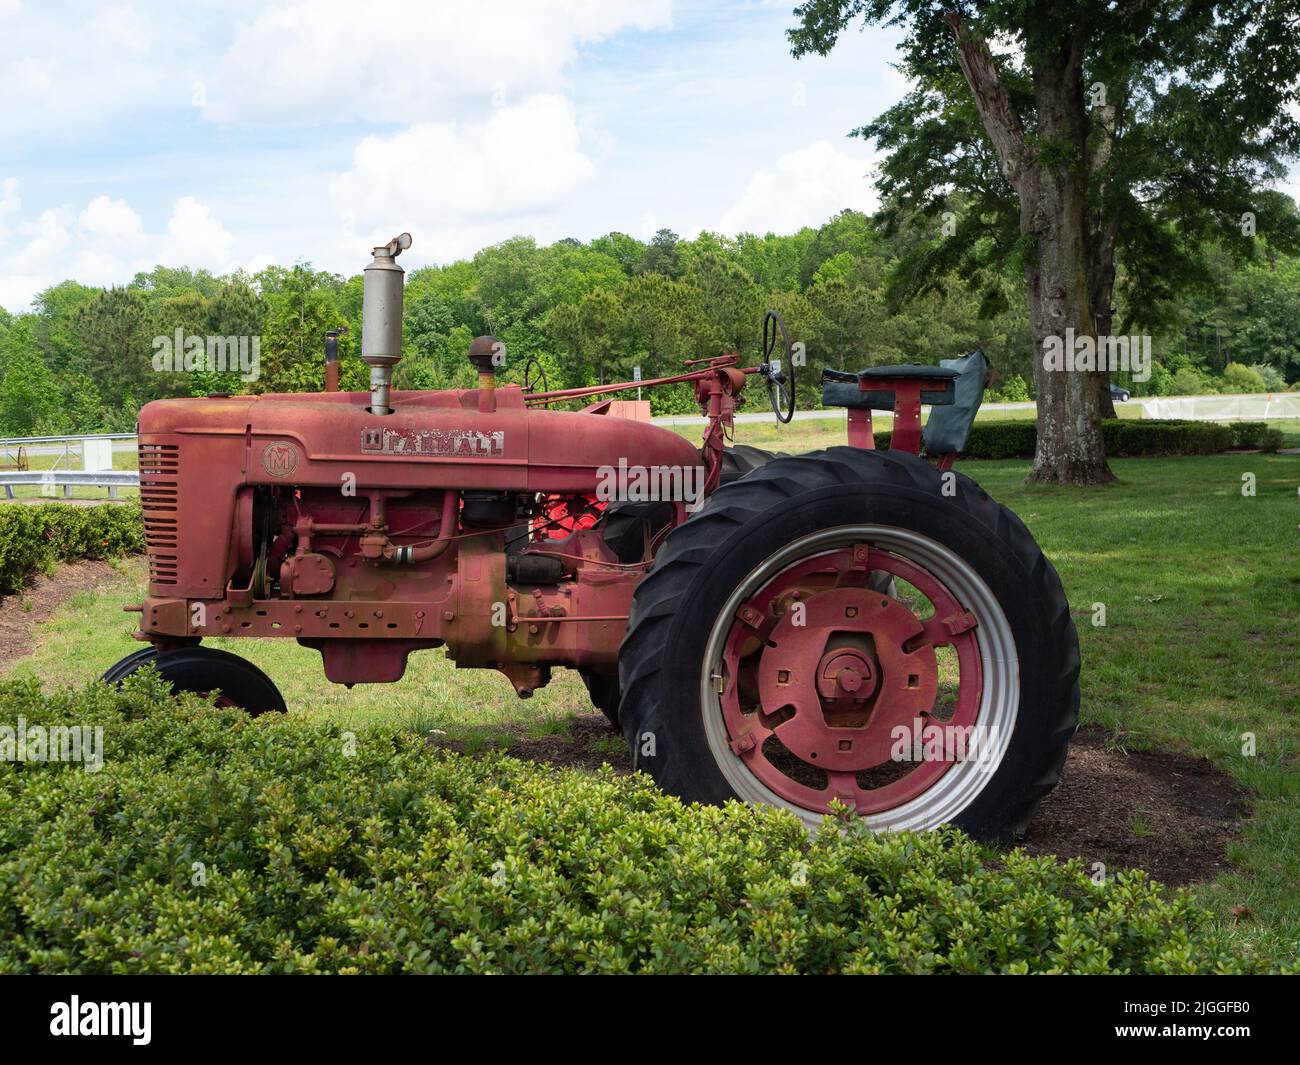 A vintage red McCormick Farmall tractor on display at the Greenbrier Farms in Chesapeake, Virginia. Stock Photo